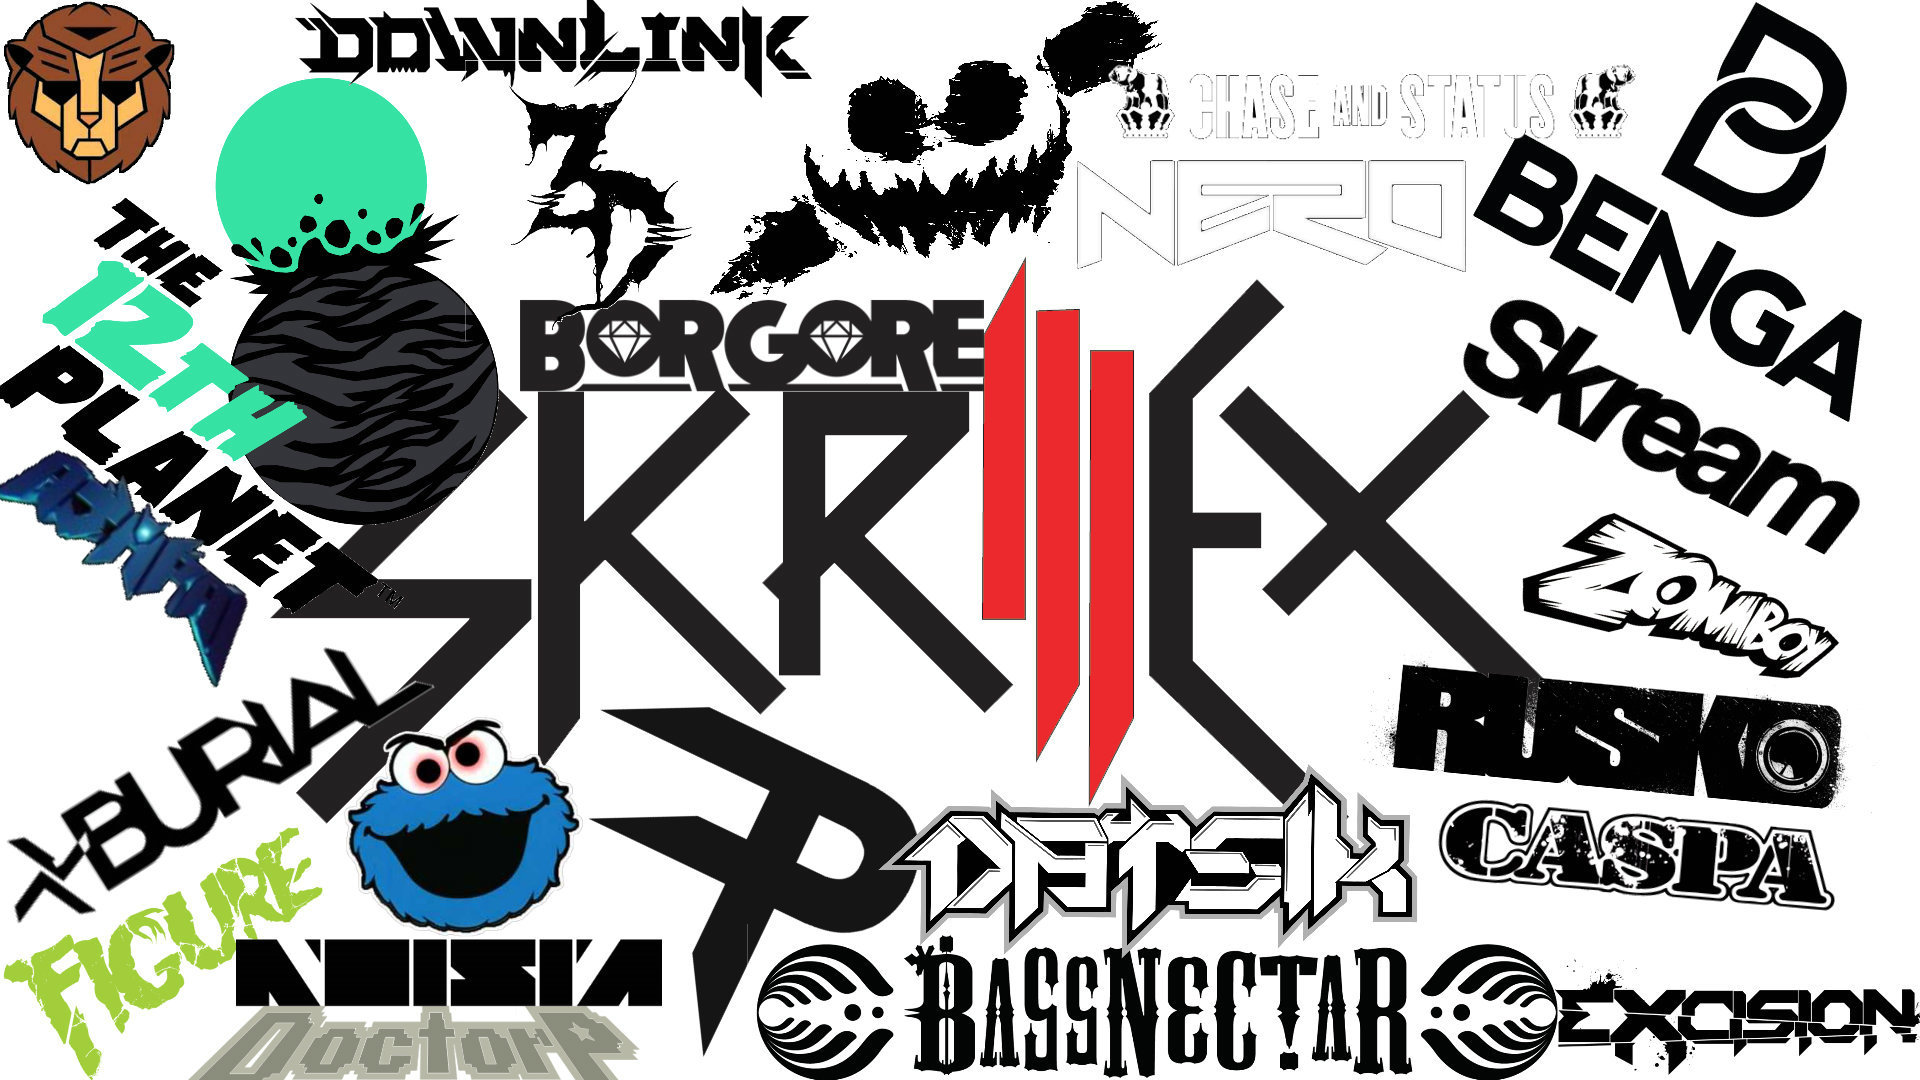 Download full hd 1920x1080 Dubstep desktop background ID:11156 for free